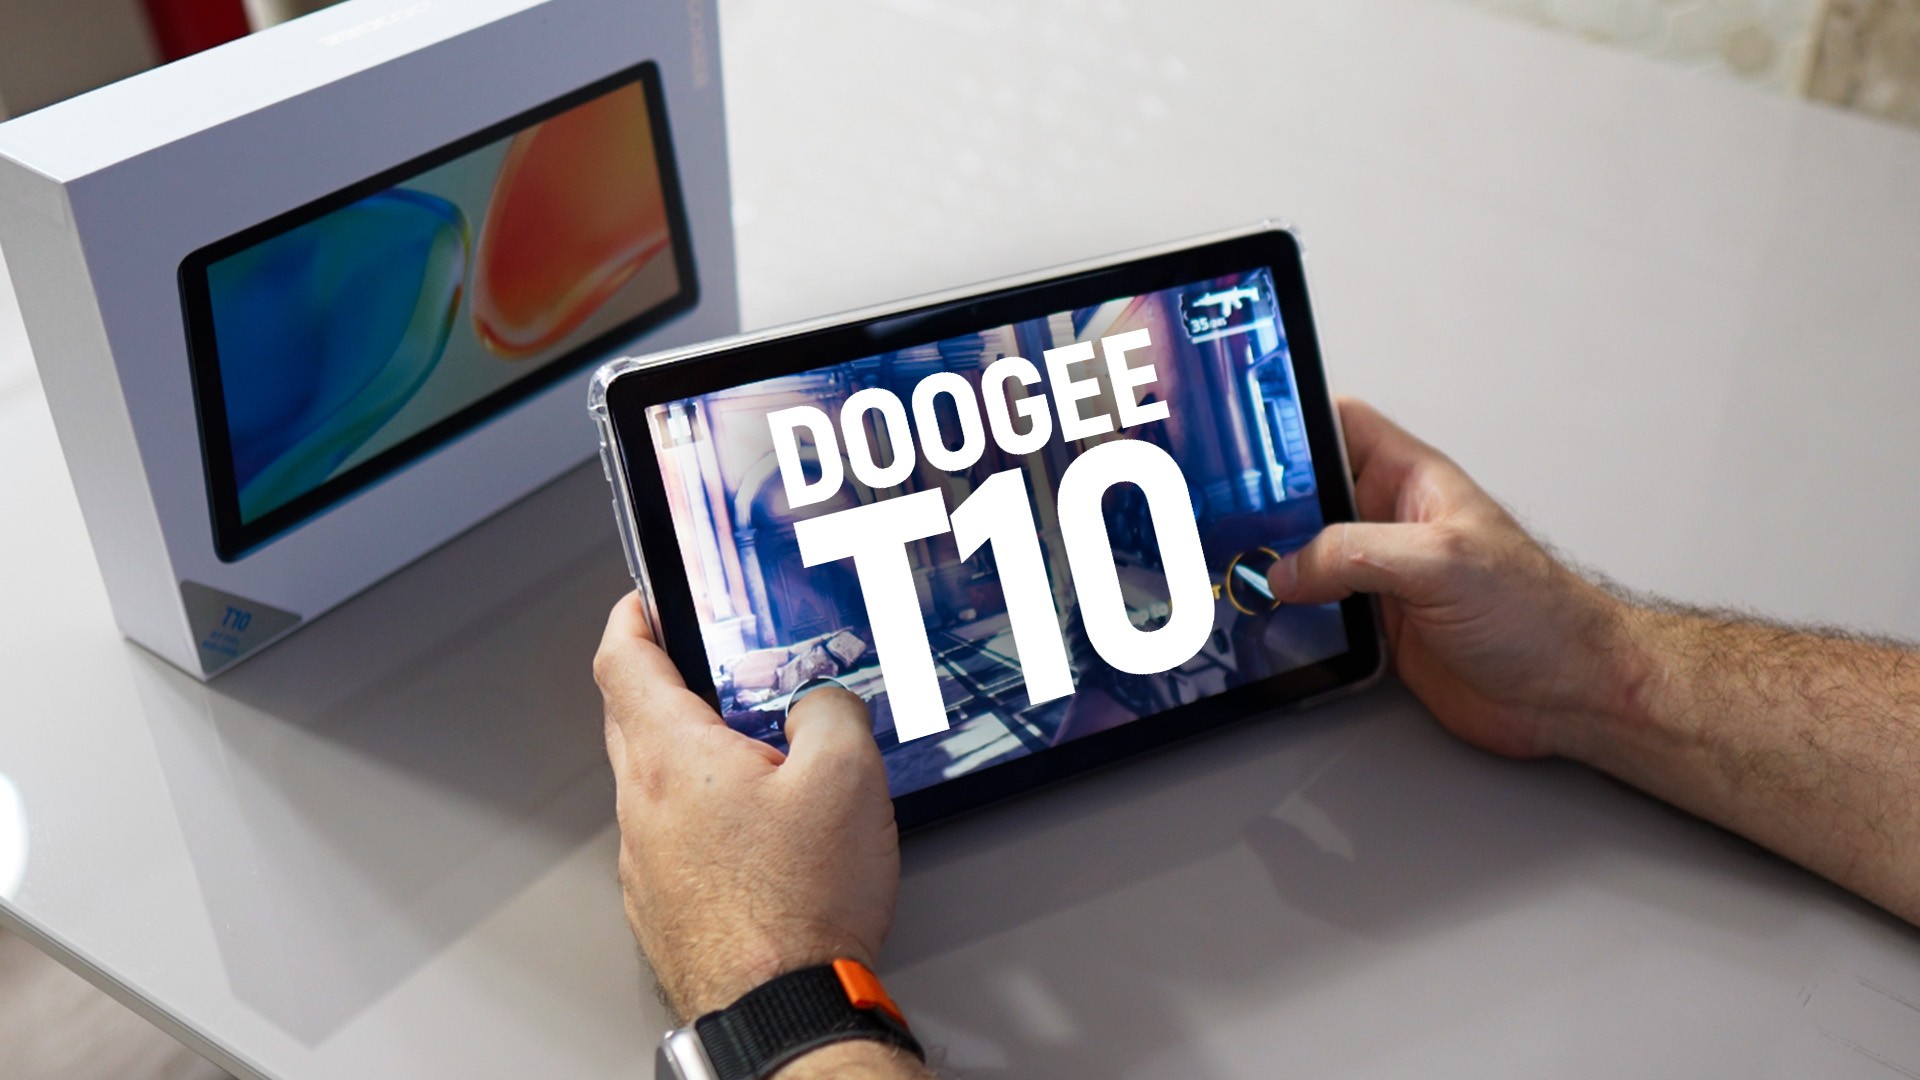 DOOGEE to enter the tablet market with the T10 : r/Android